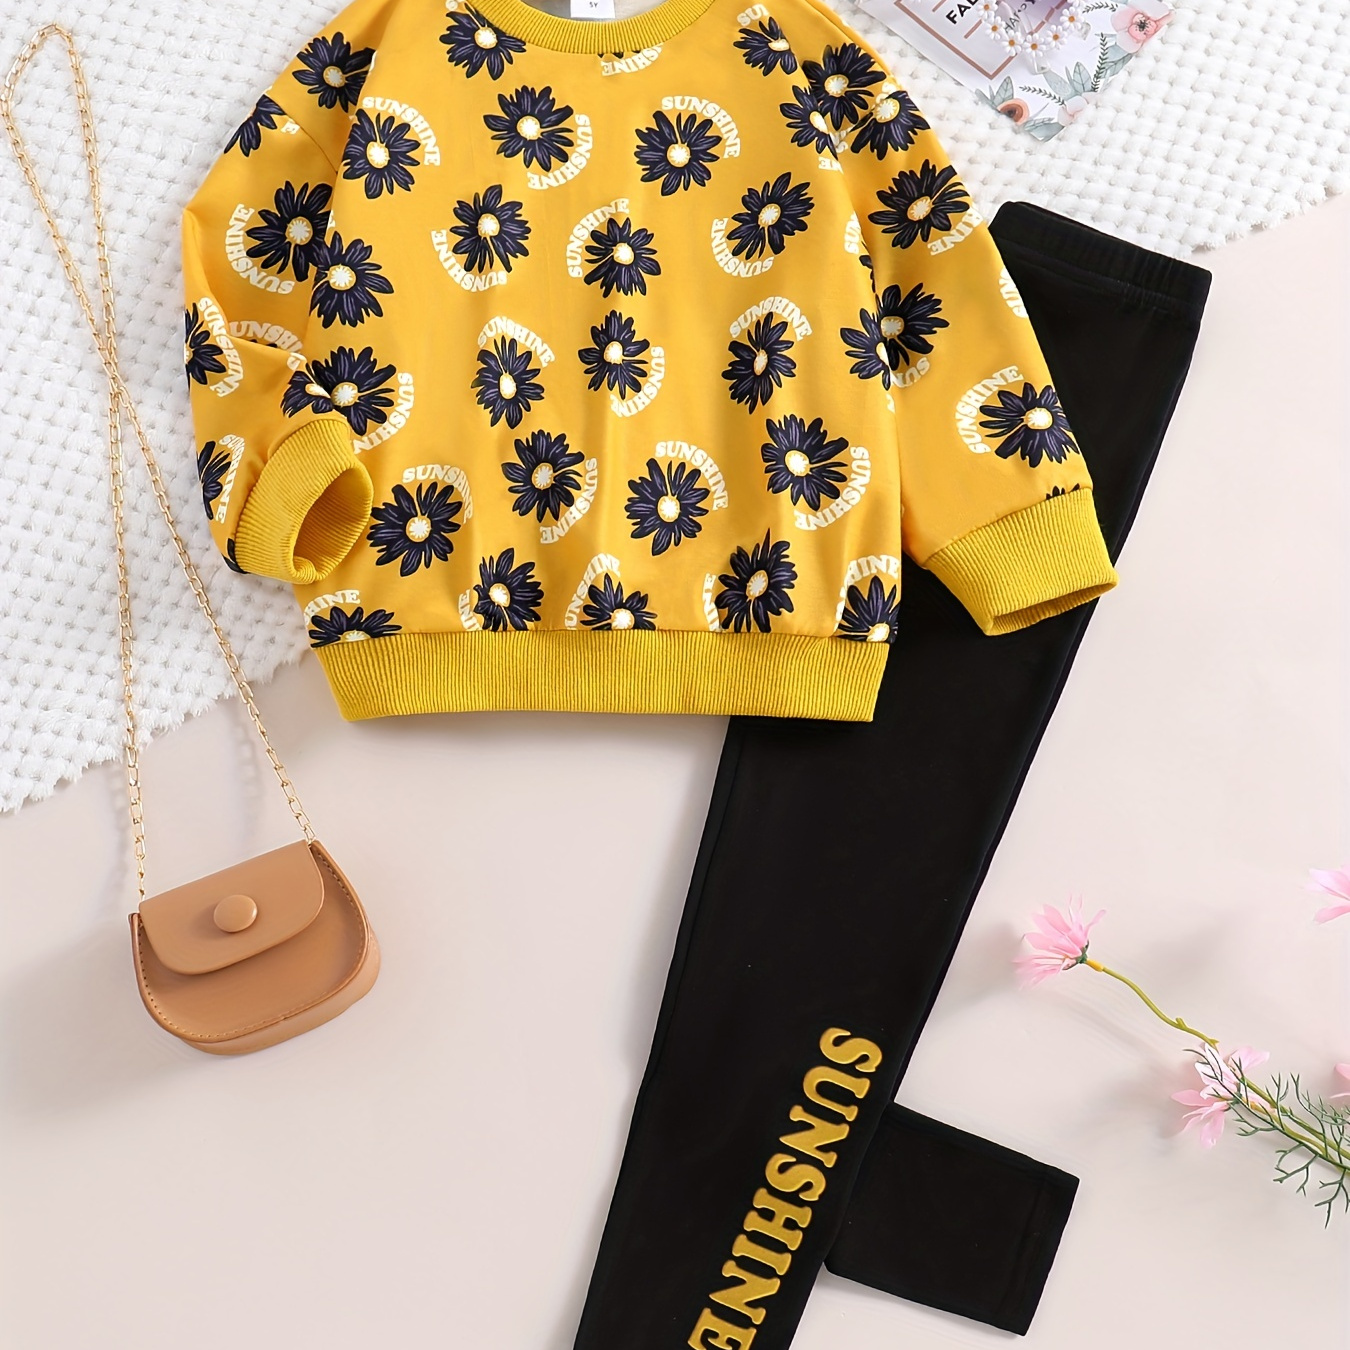 

Girl's 2pcs, Sweatshirt & Leggings Set, Sunflower Sunshine Print Long Sleeve Top, Casual Outfits, Kids Clothes For Spring Fall